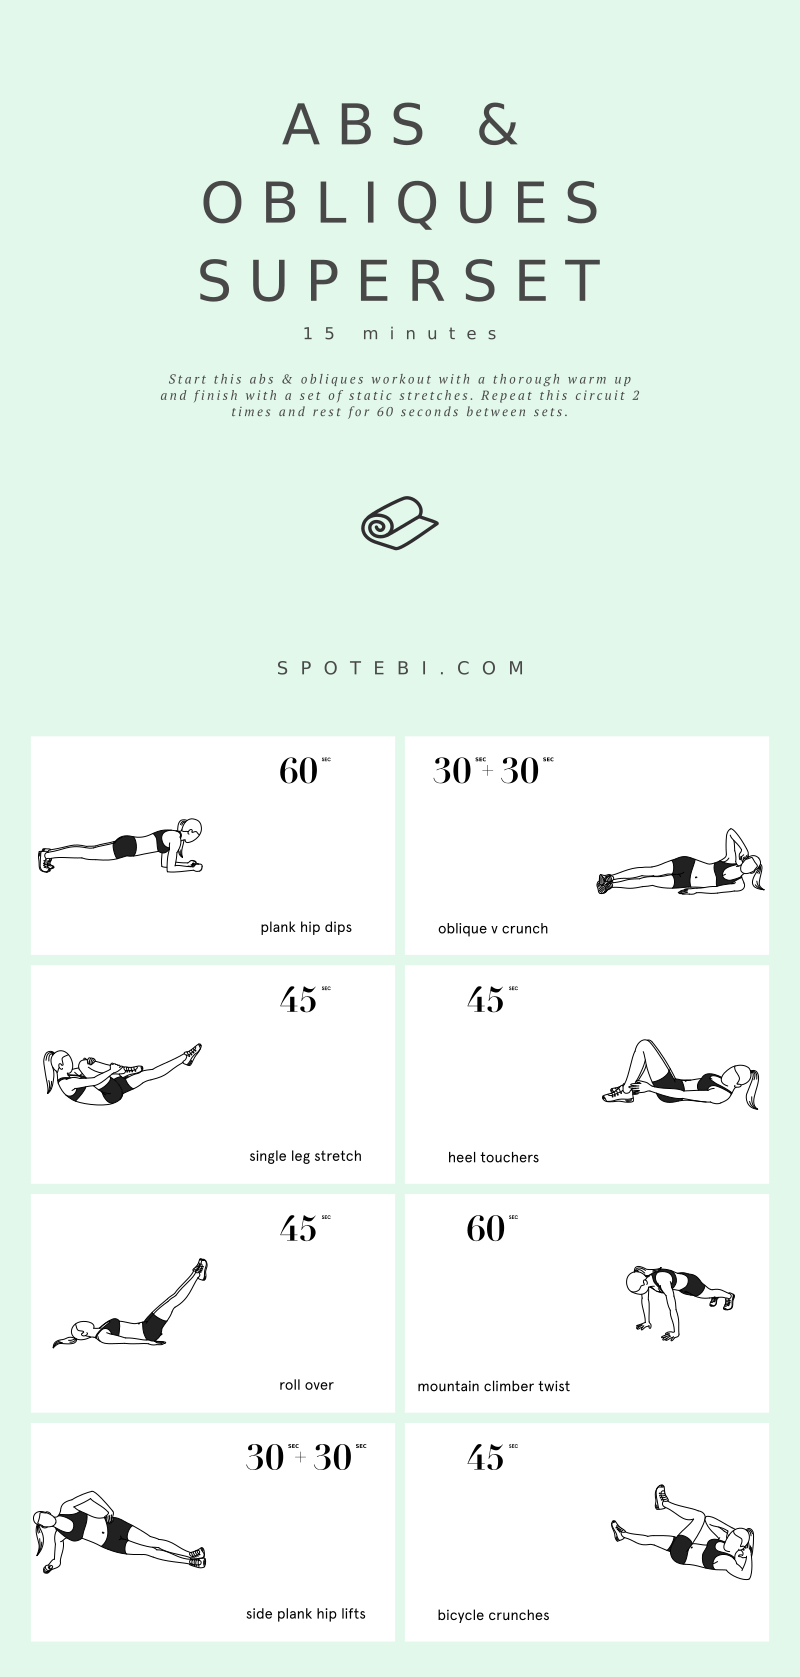 Move quickly from one exercise to the next while performing this 15-Minute Abs & Obliques Superset. Save time and get results faster! https://www.spotebi.com/workout-routines/15-minute-abs-obliques-superset/